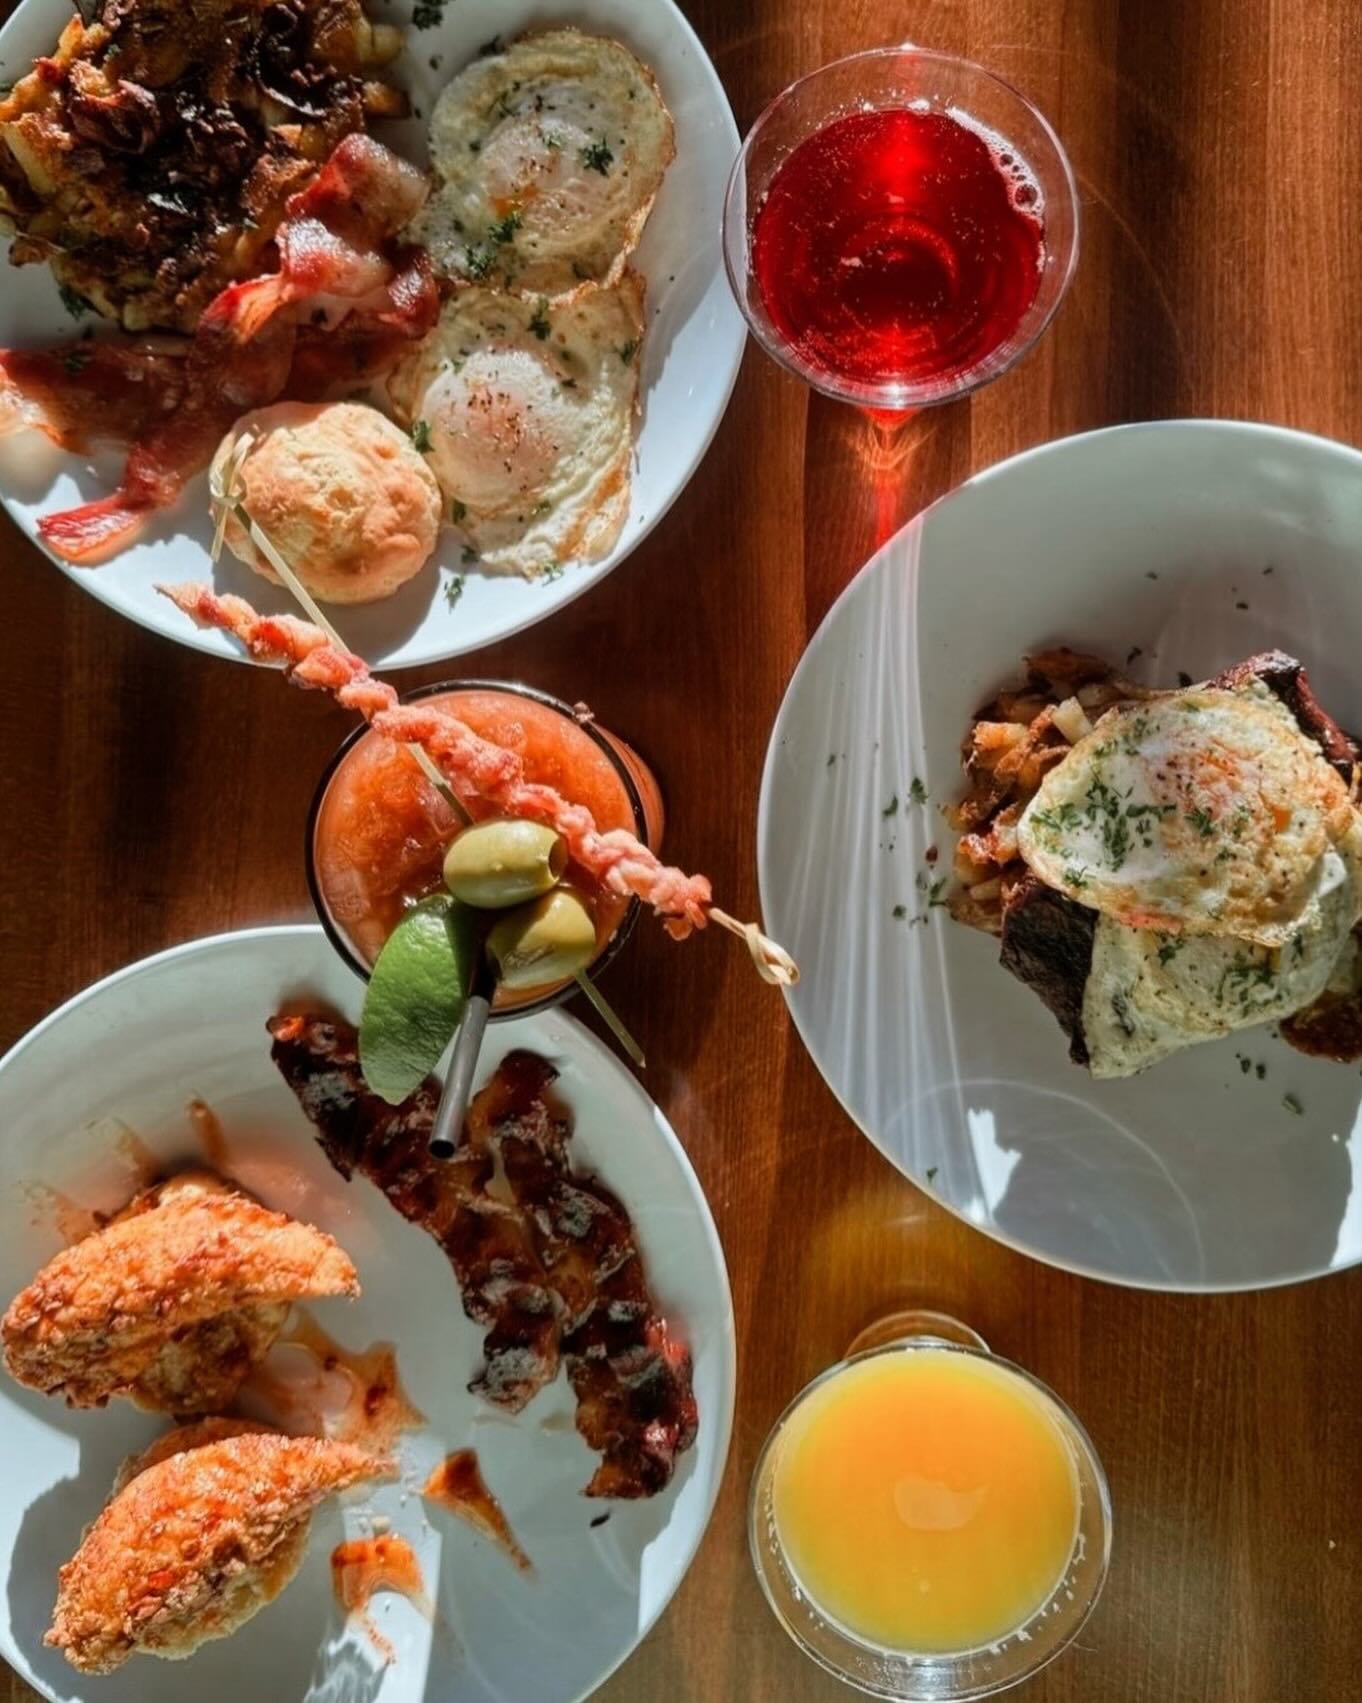 Brunch just got a little earlier ☀️

We&rsquo;ll see you this morning for delicious food &amp; a Bloody Mary or two 😉 Our brunch menu will be exclusively served from 9am-noon on Saturdays &amp; Sundays! Lunch will be available after 12pm.